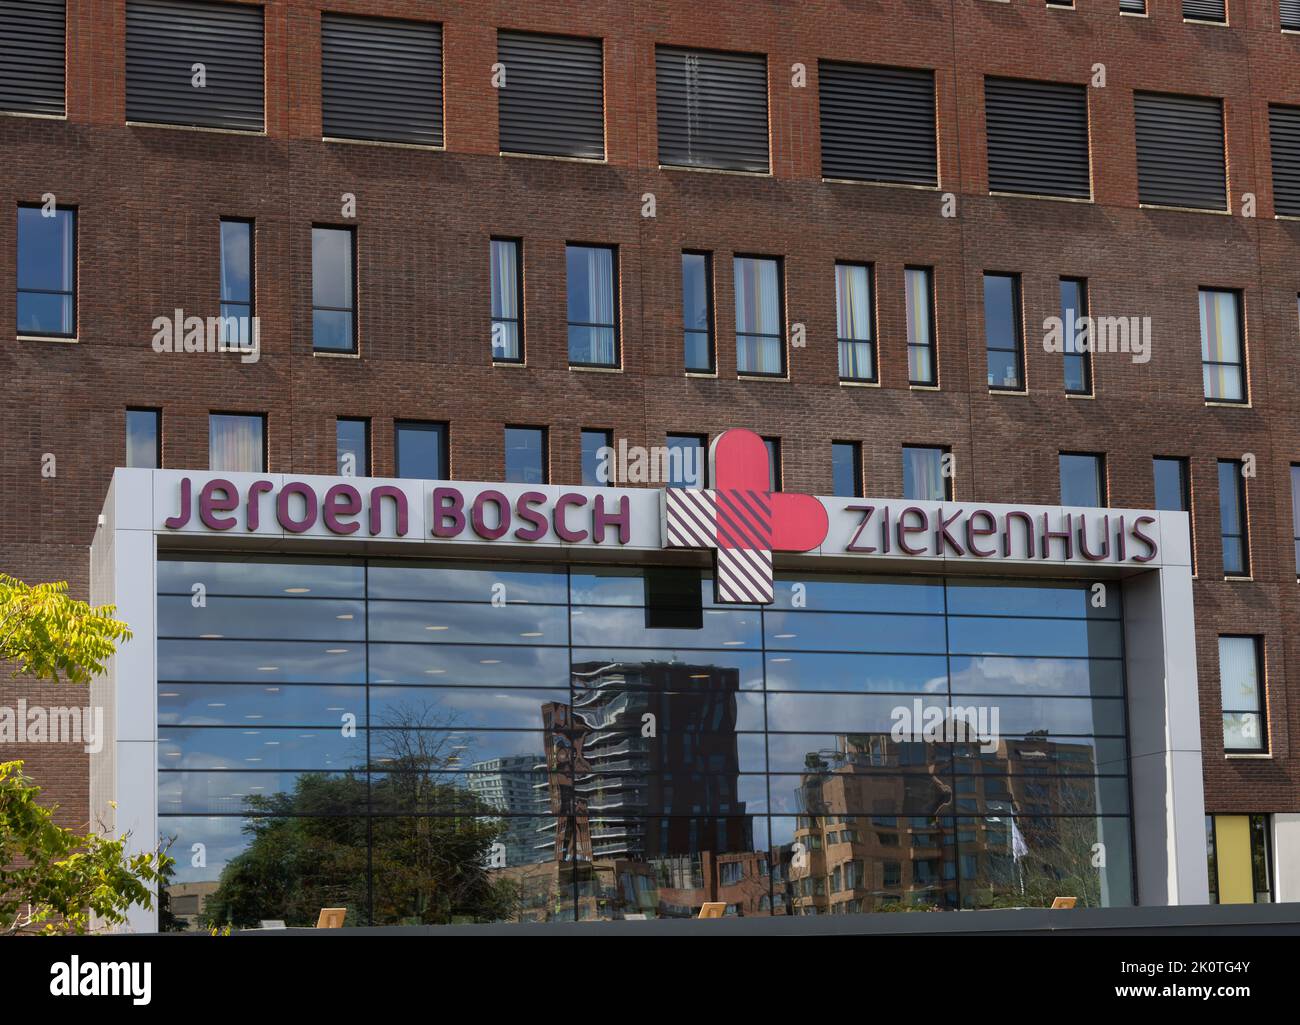 Close-up of the main entrance of 'Jeroen Bosch'-hospital. Reflection in the glass shows residential buildings. Stock Photo